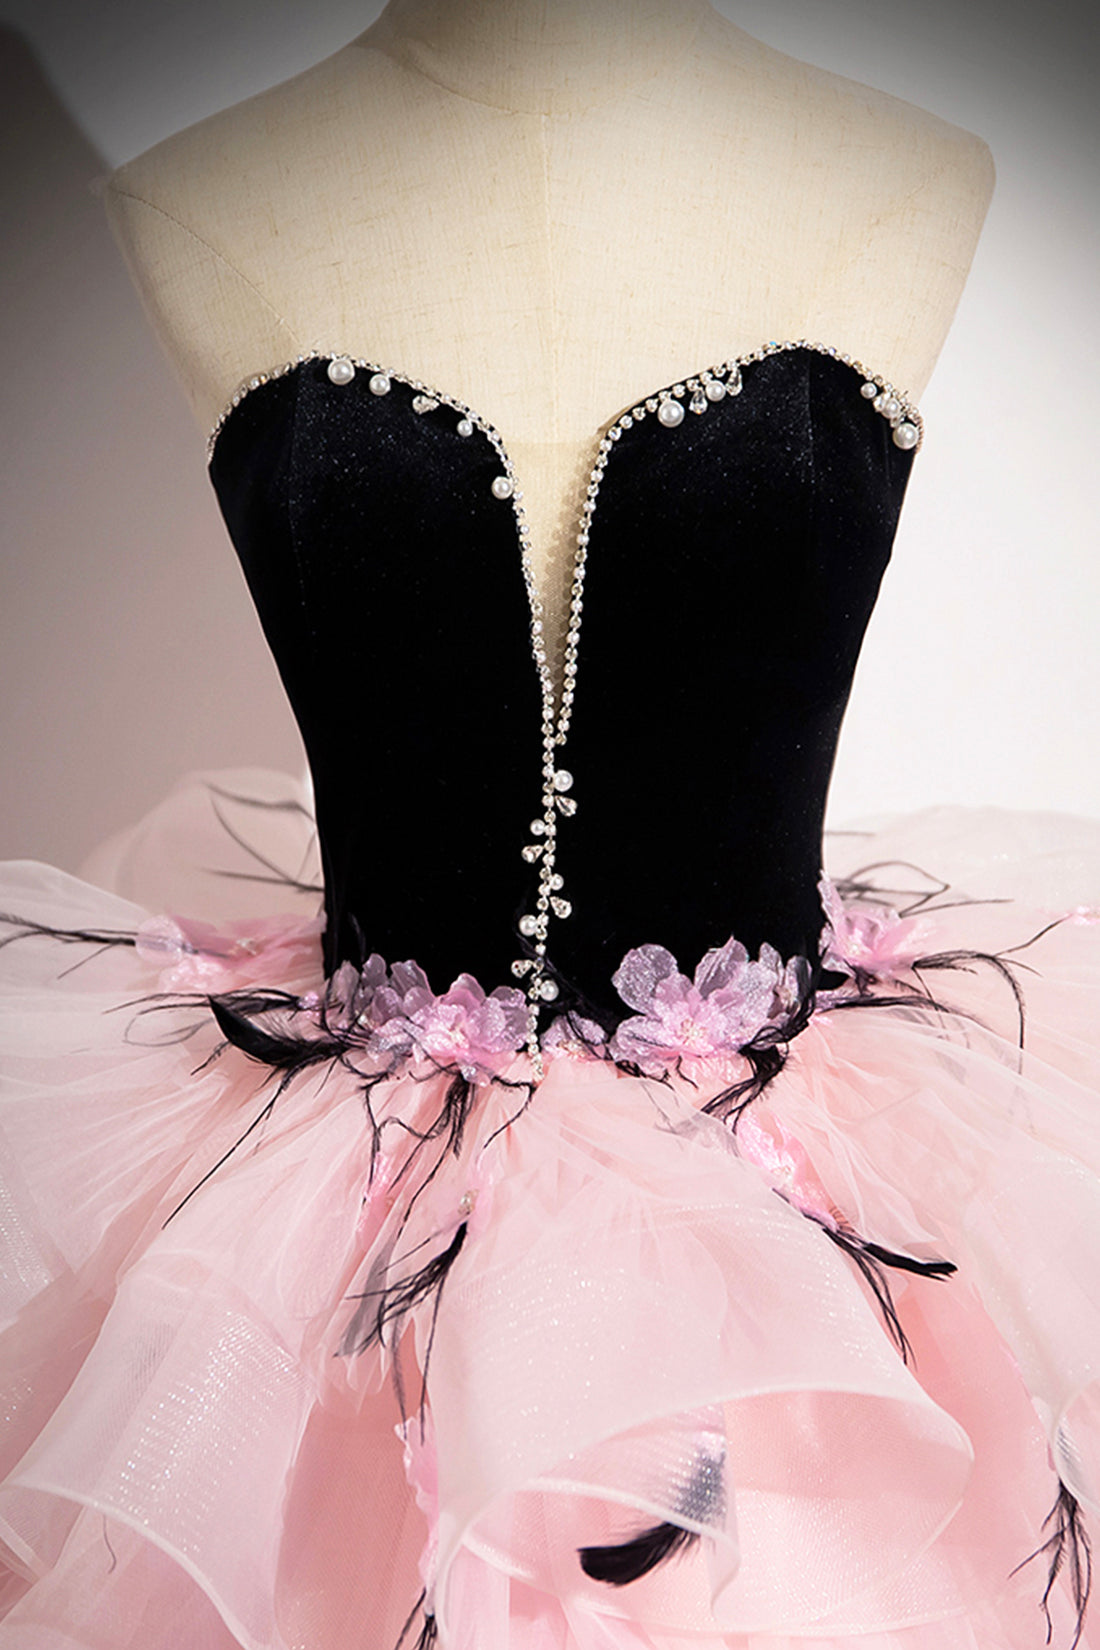 Black Velvet and Pink Tulle Strapless Ball Gown, Pink Backless Ruffles Formal Evening Dress